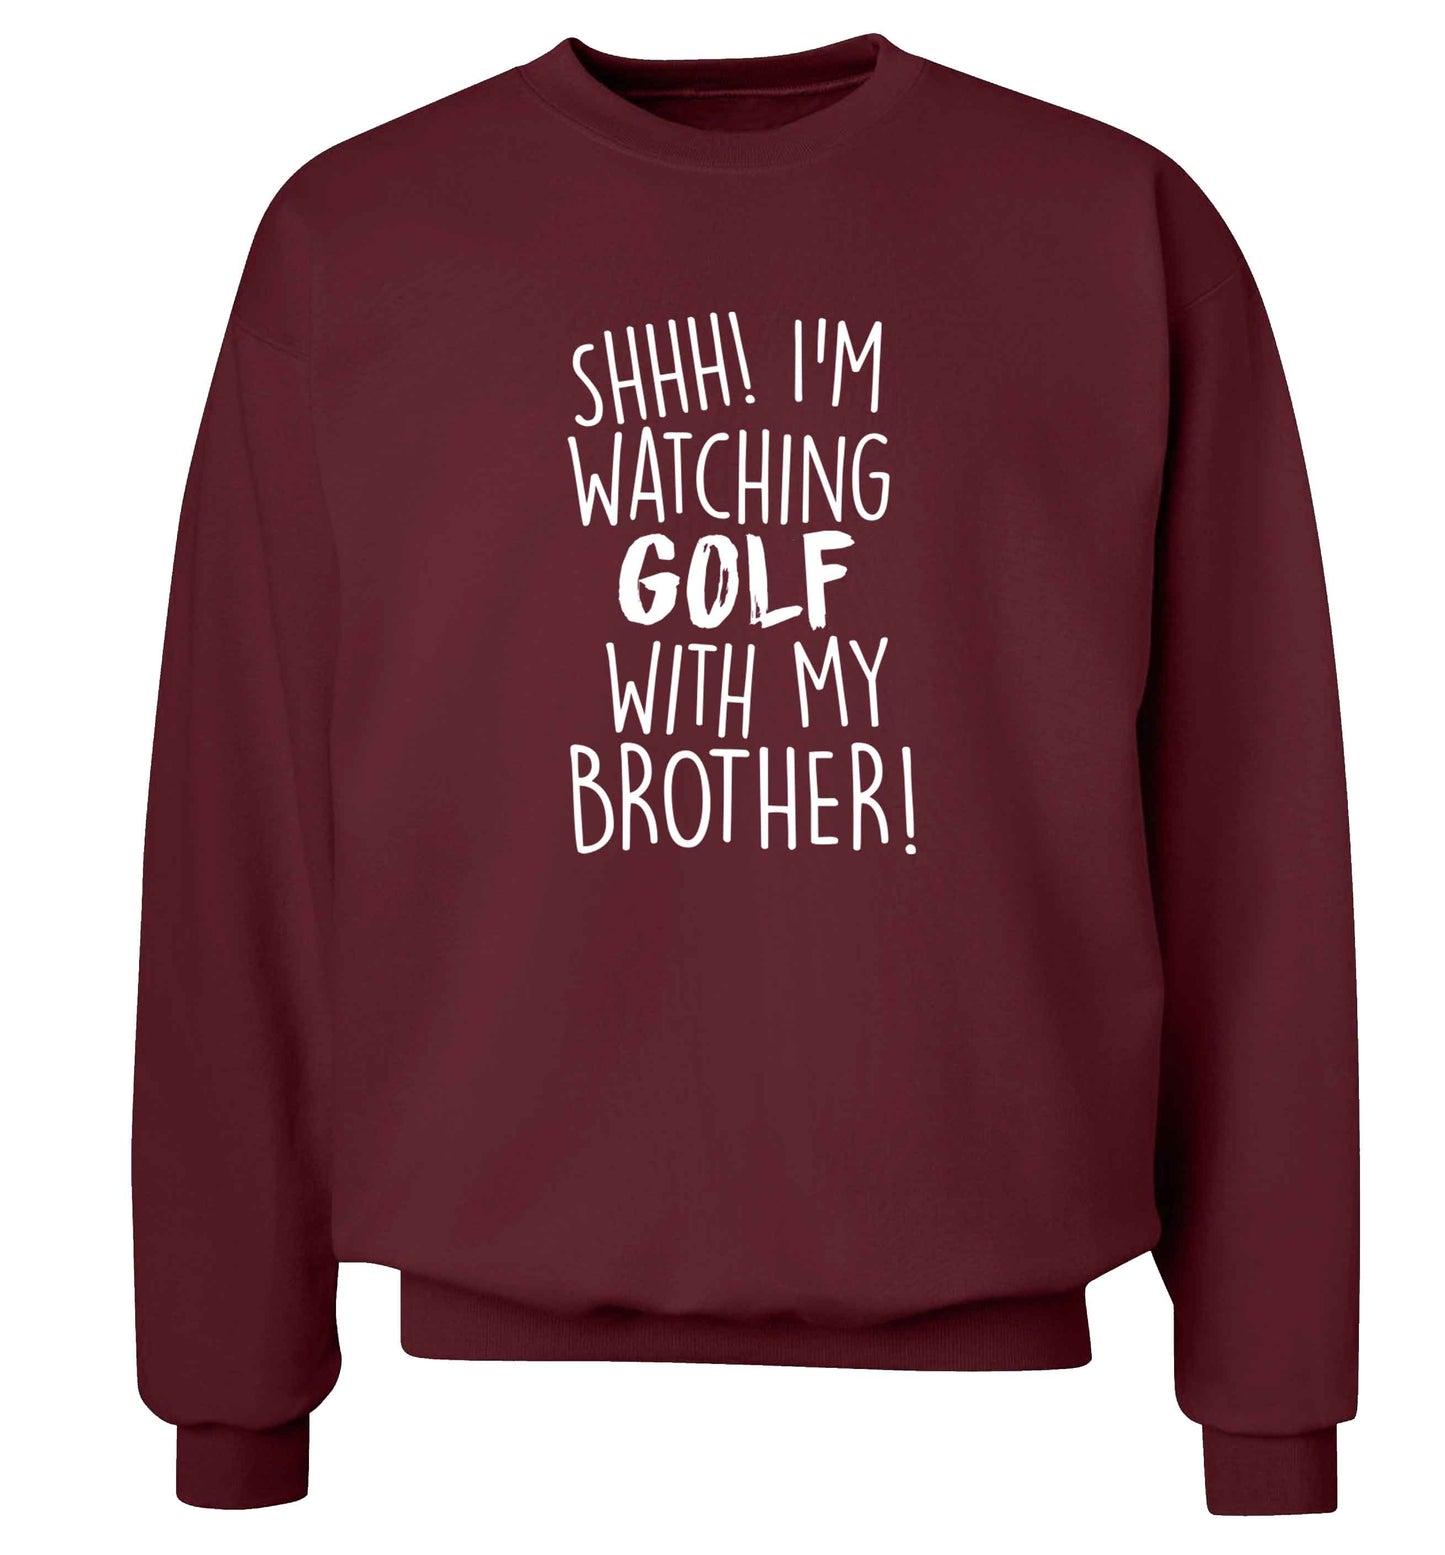 Shh I'm watching golf with my brother Adult's unisex maroon Sweater 2XL